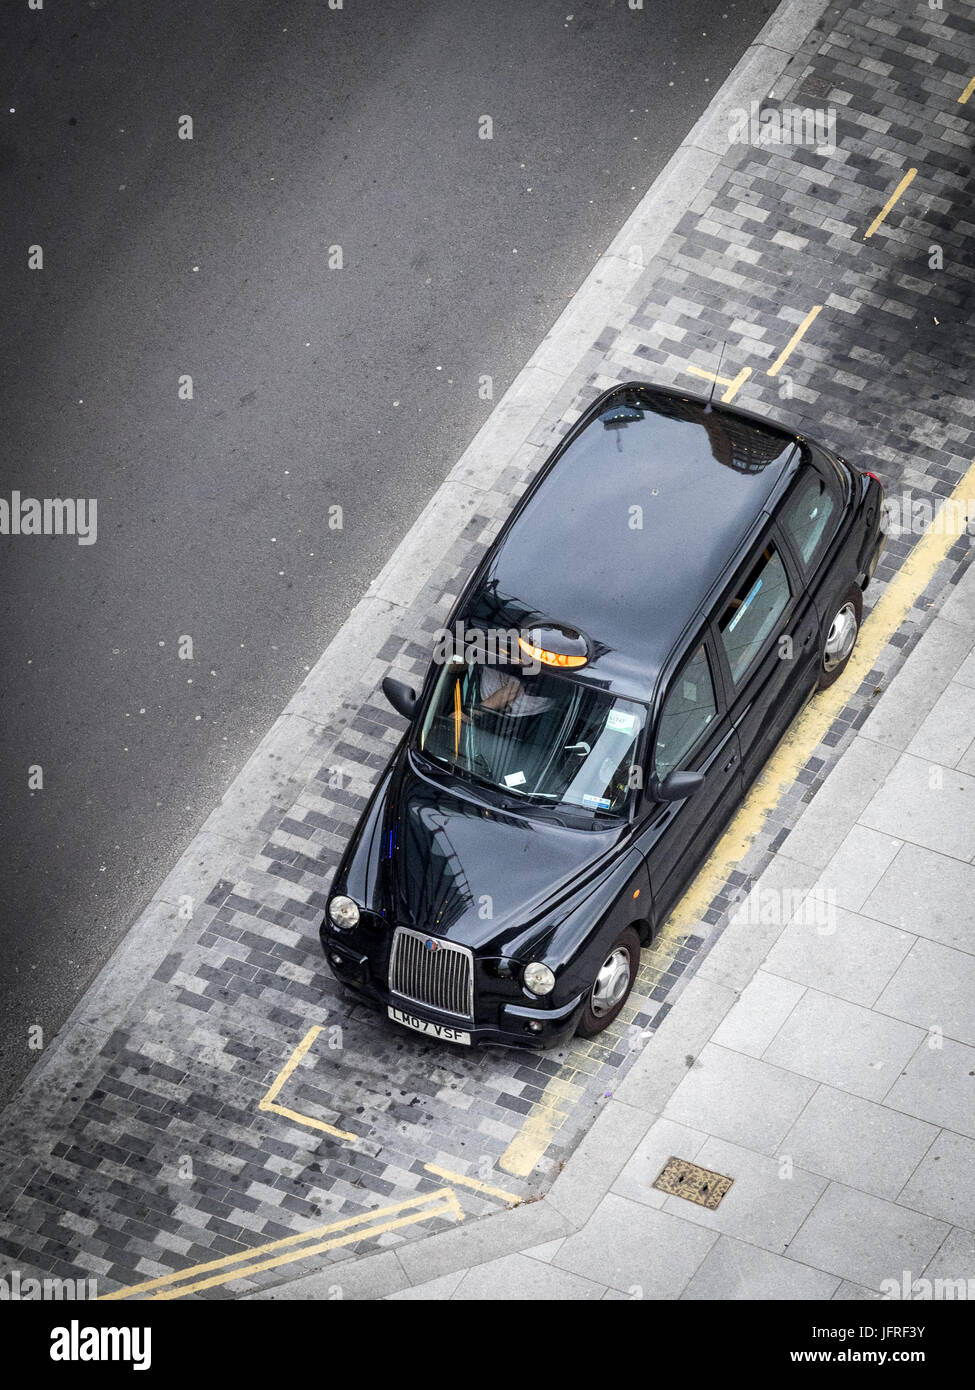 London Taxi Waiting - an aerial shot of a lone London Taxi from above, waiting for customers near the Tate Modern Art Gallery on London's South Bank Stock Photo